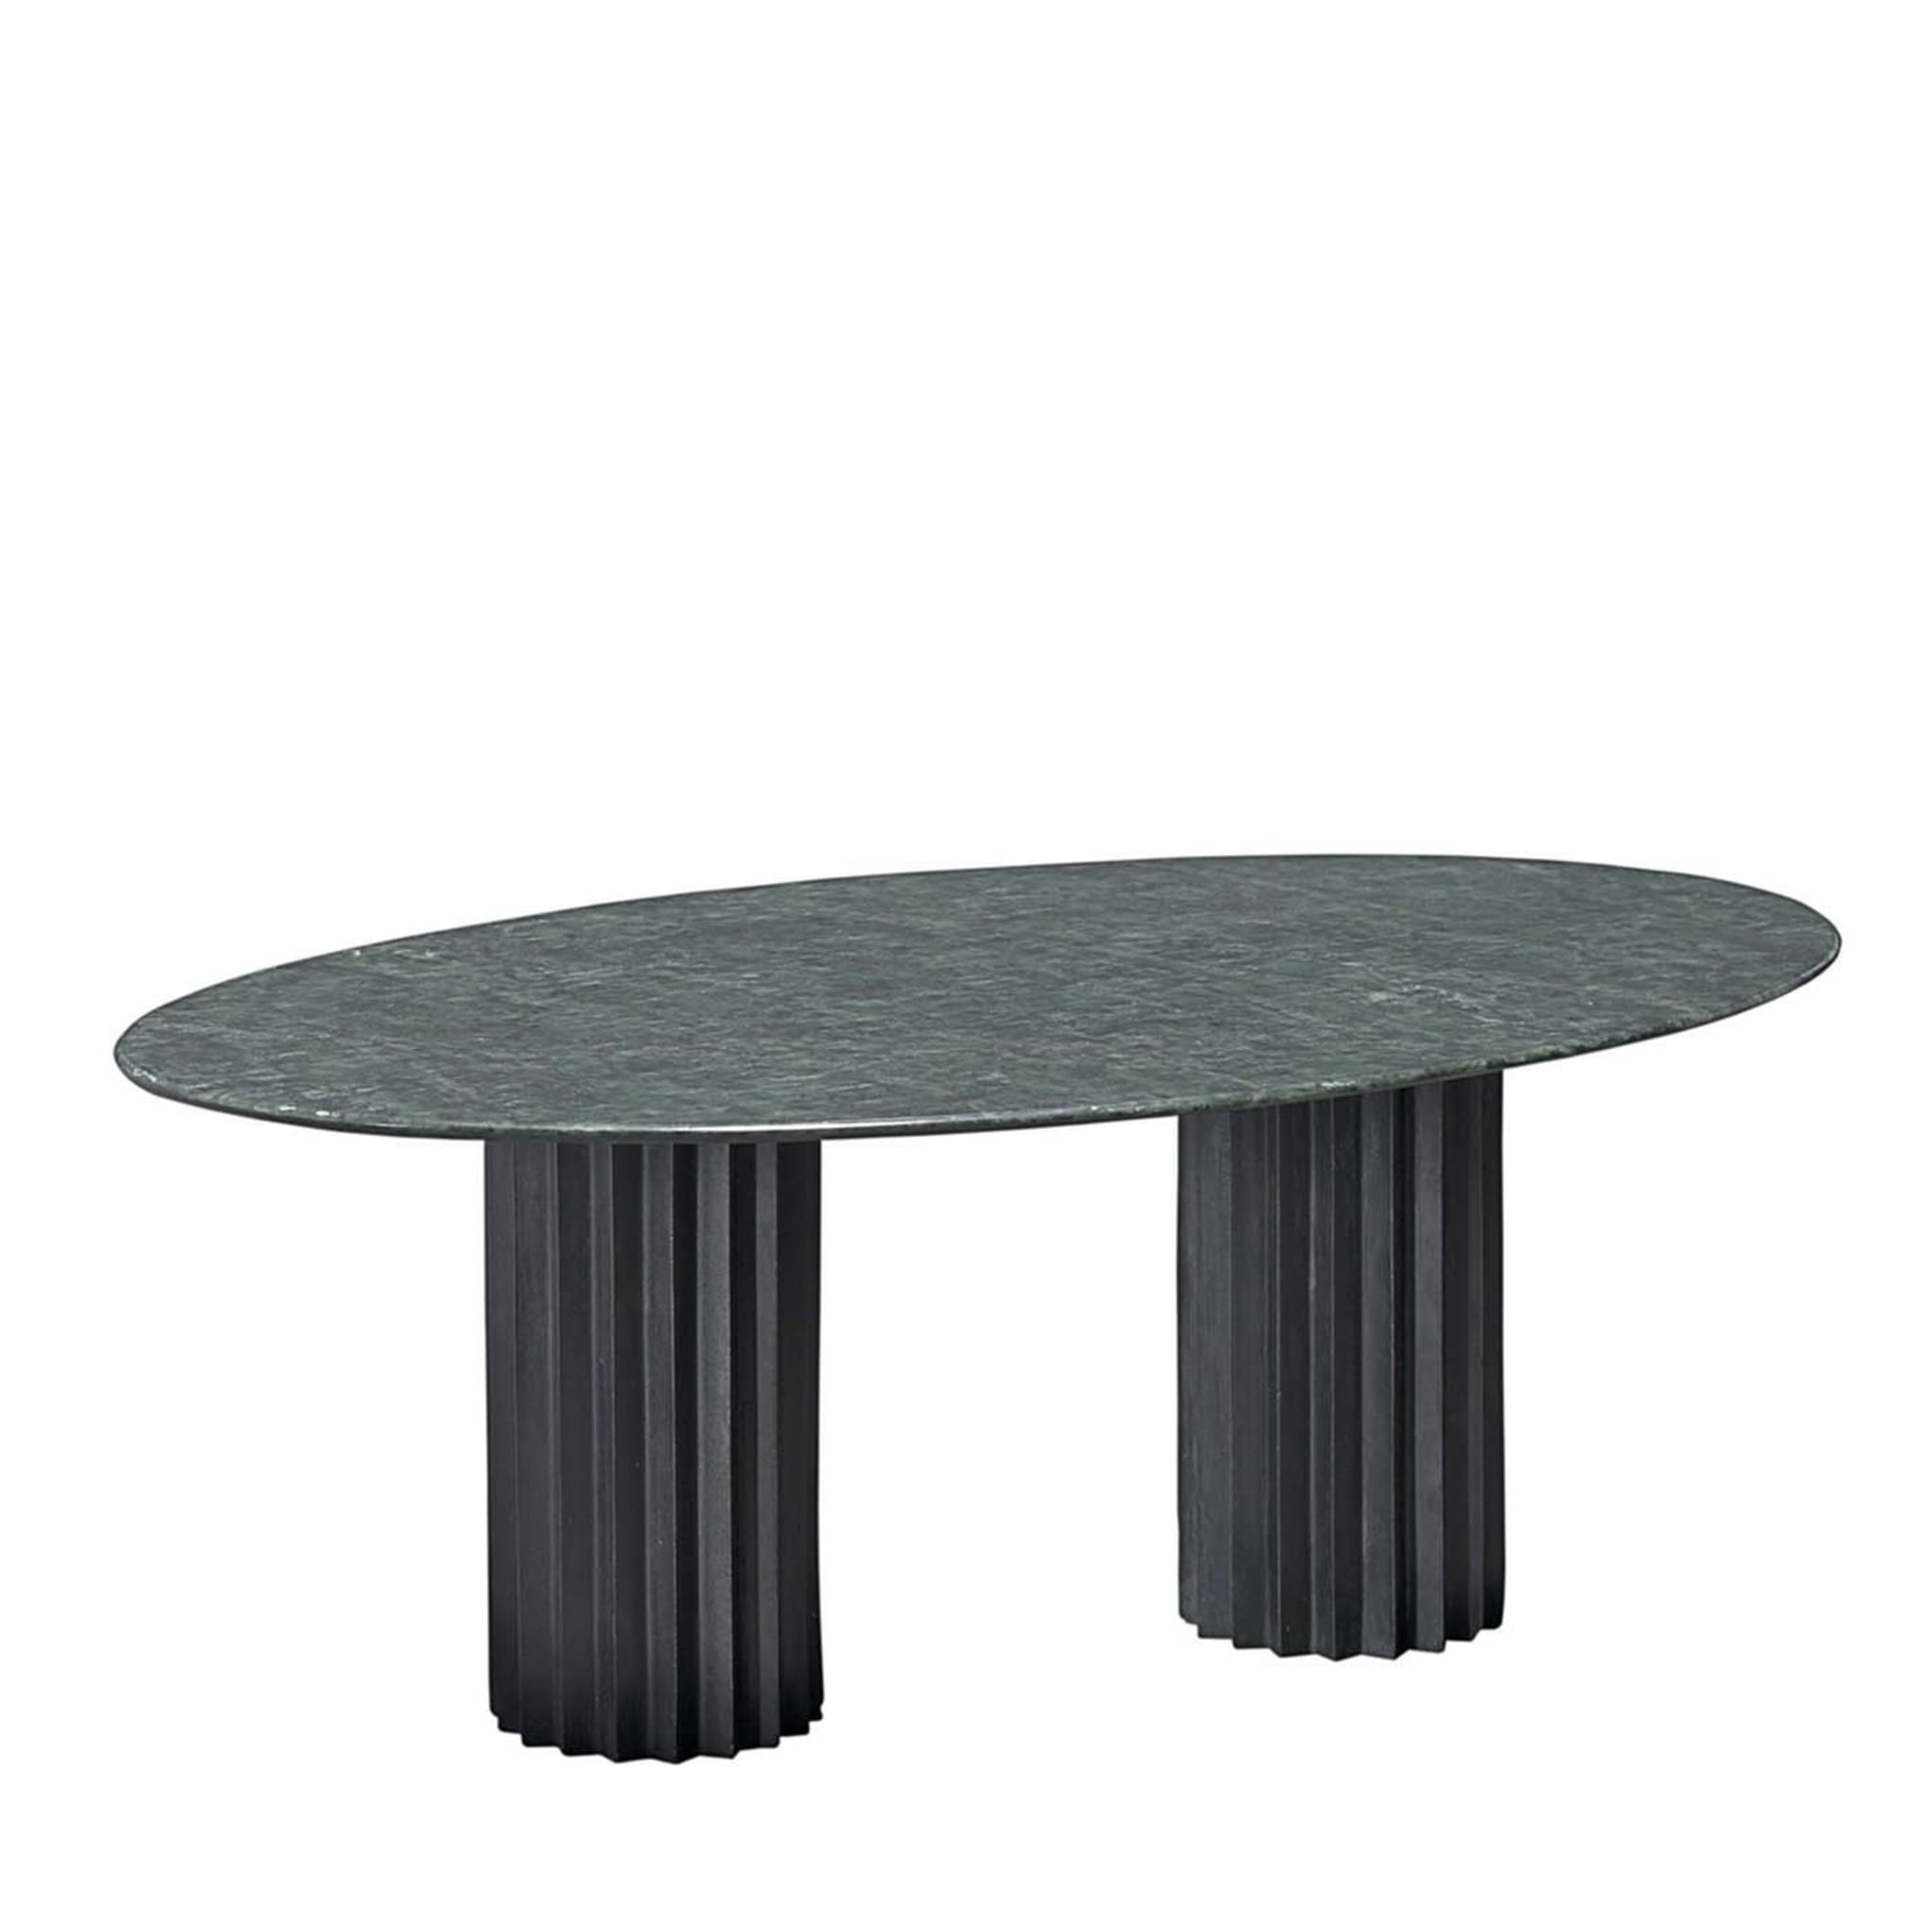 Doris Oval Dining Table in Green Marble and Bronze - Main view